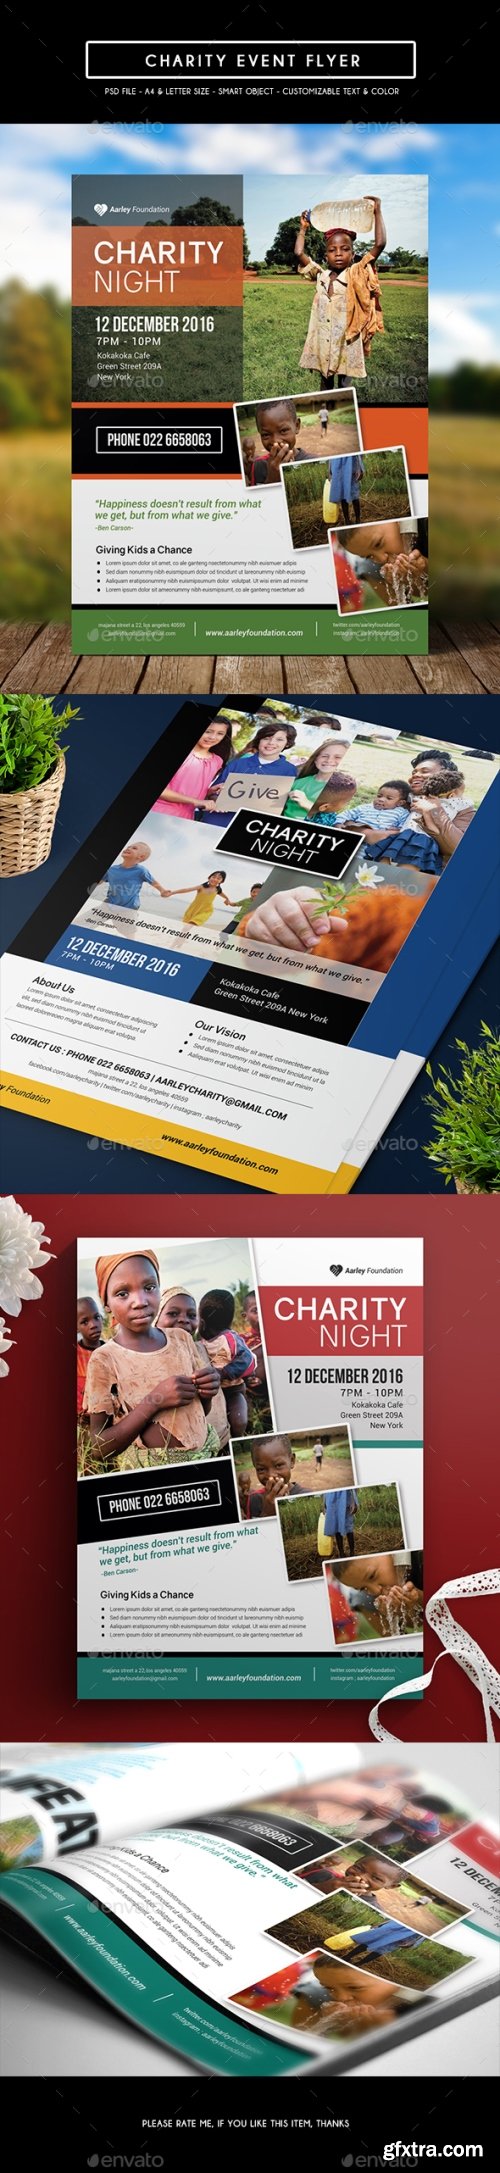 Graphicriver - Charity Event Flyer 14198446